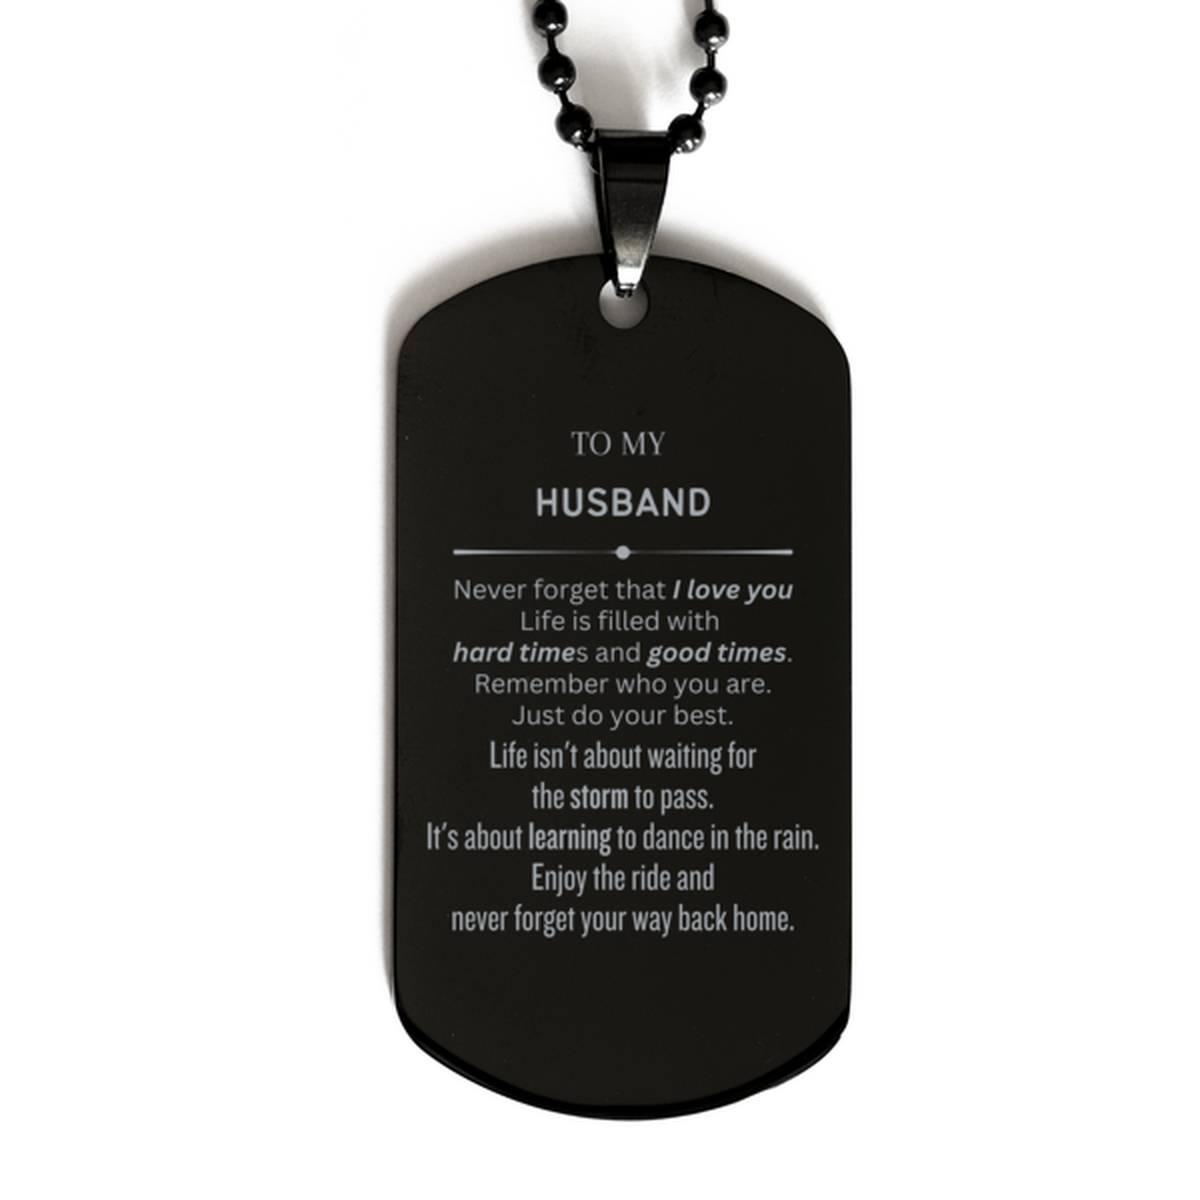 Christmas Husband Black Dog Tag Gifts, To My Husband Birthday Thank You Gifts For Husband, Graduation Unique Gifts For Husband To My Husband Never forget that I love you life is filled with hard times and good times. Remember who you are. Just do your bes